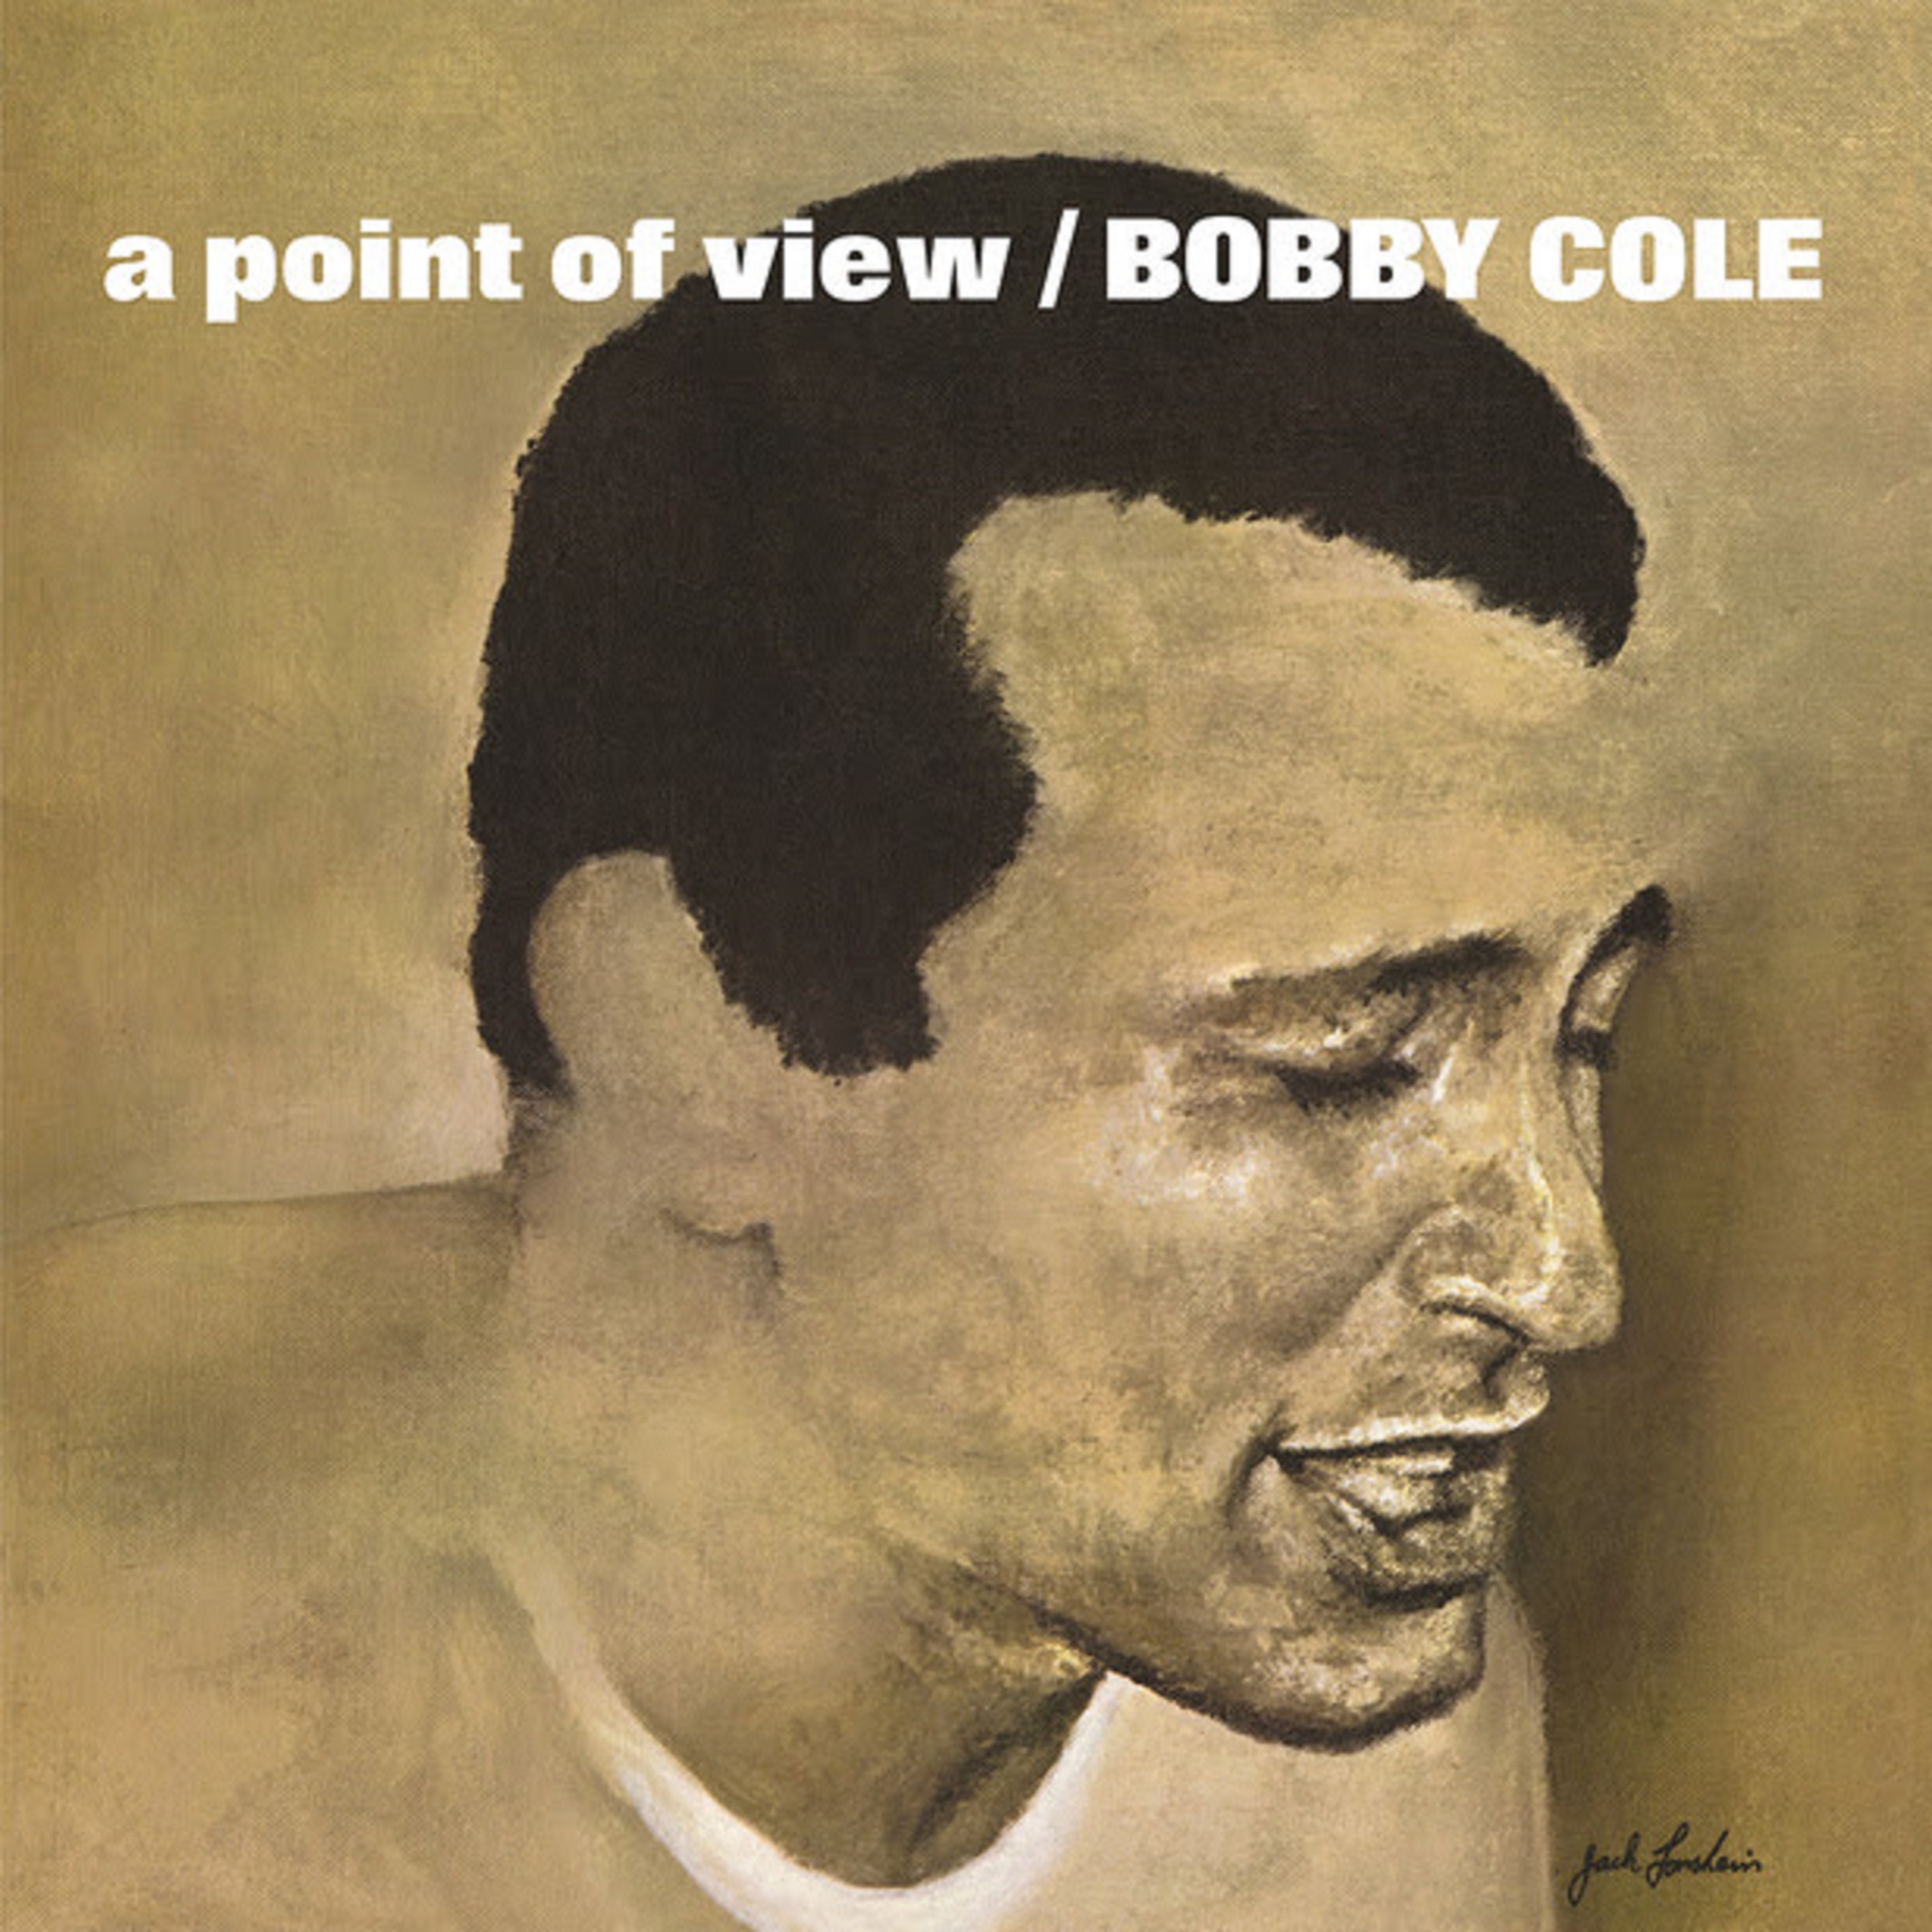 Reissue of Bobby Cole 1967 classic album coming April 15 from Omnivore Recordings; was music arranger for Judy Garland